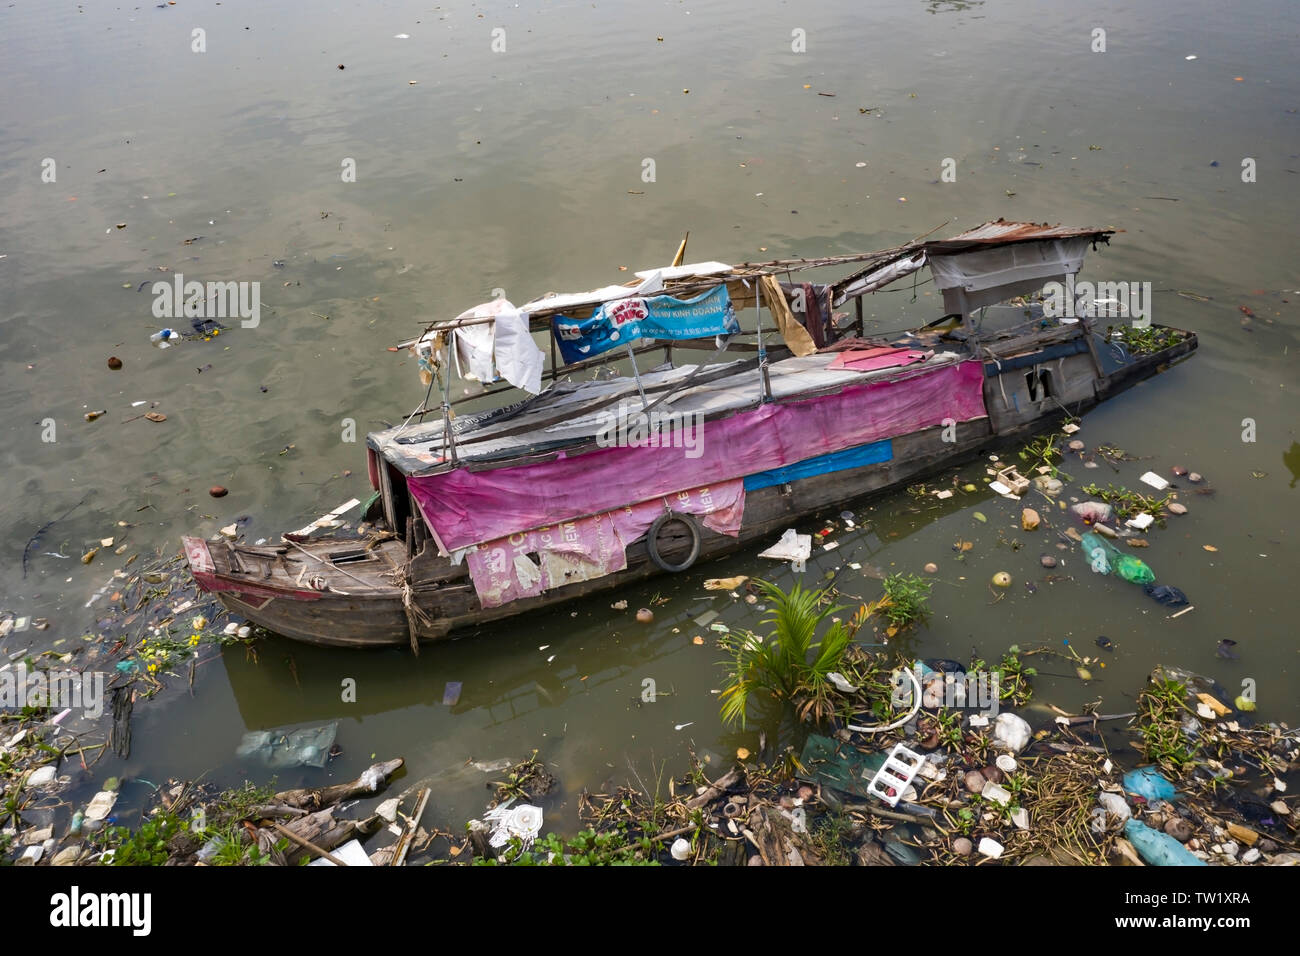 A sunken traditional Vietnamese River Boat (House Boat) in a canal running into the Saigon River in Ho Chi Minh City, Vietnam. Loss and tragedy Stock Photo